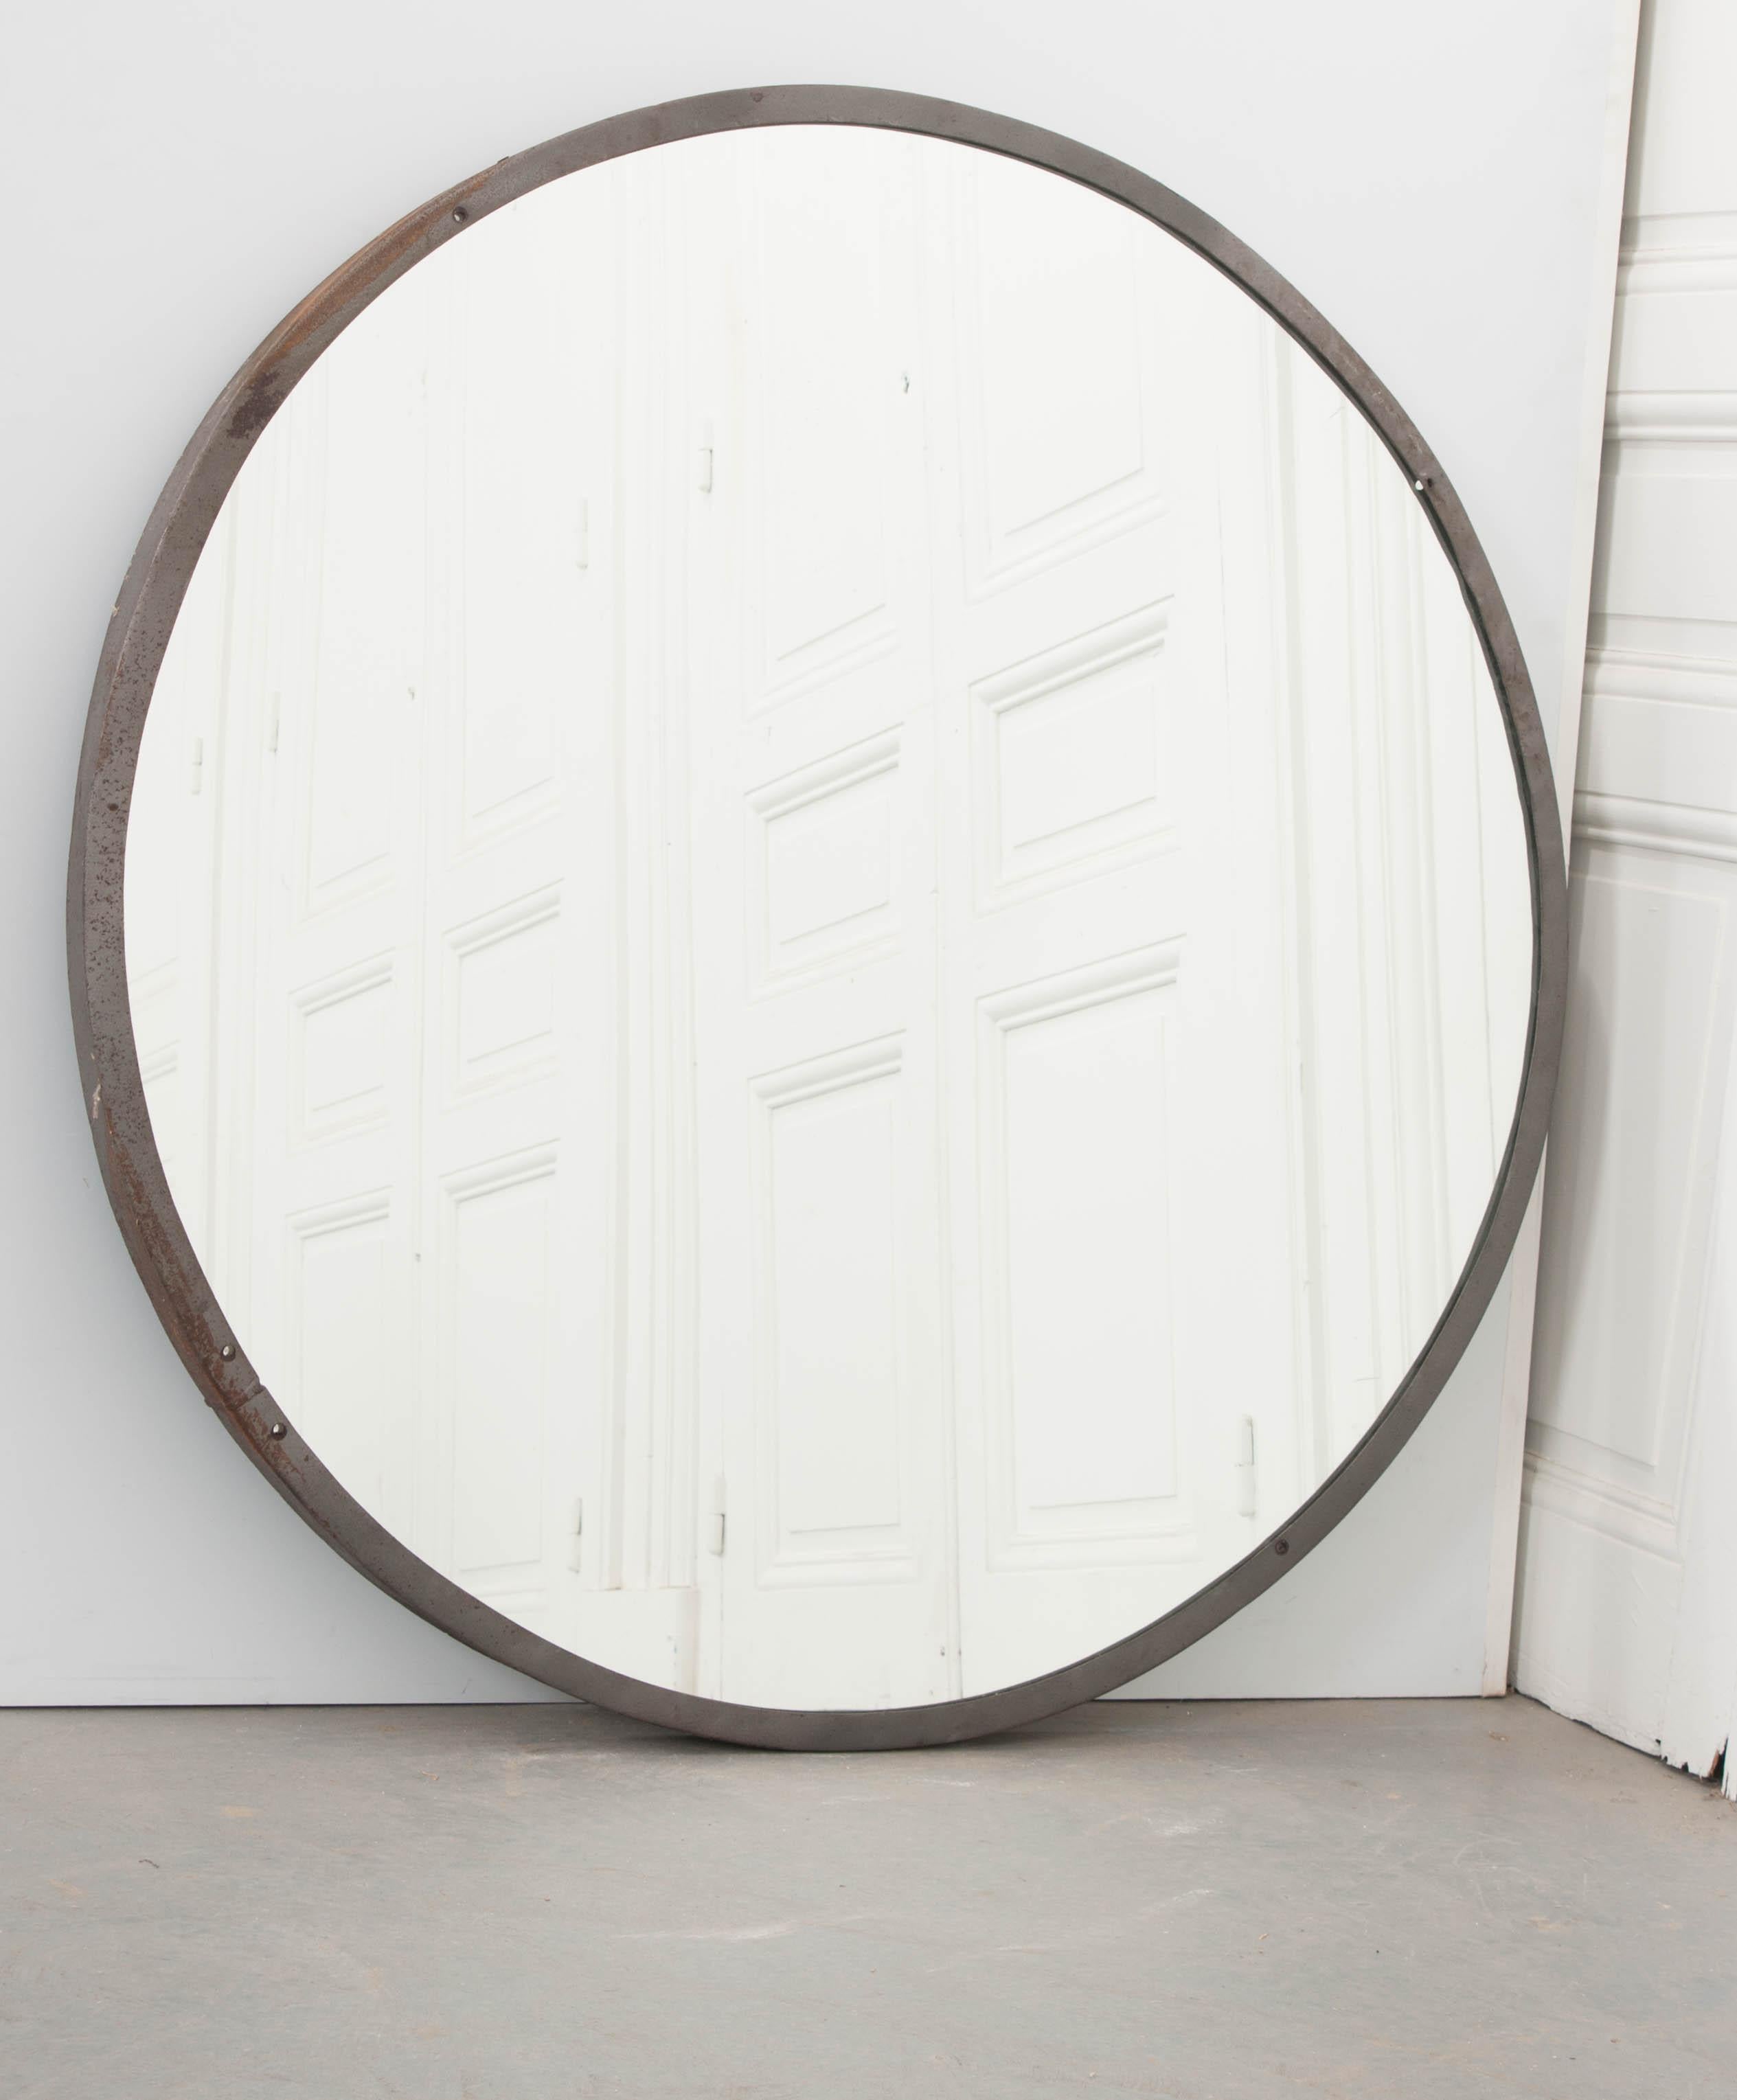 Round mirrors with metal frames are a unique and fun way to add an element of modernity to your space. This mirror has a 41-3/4